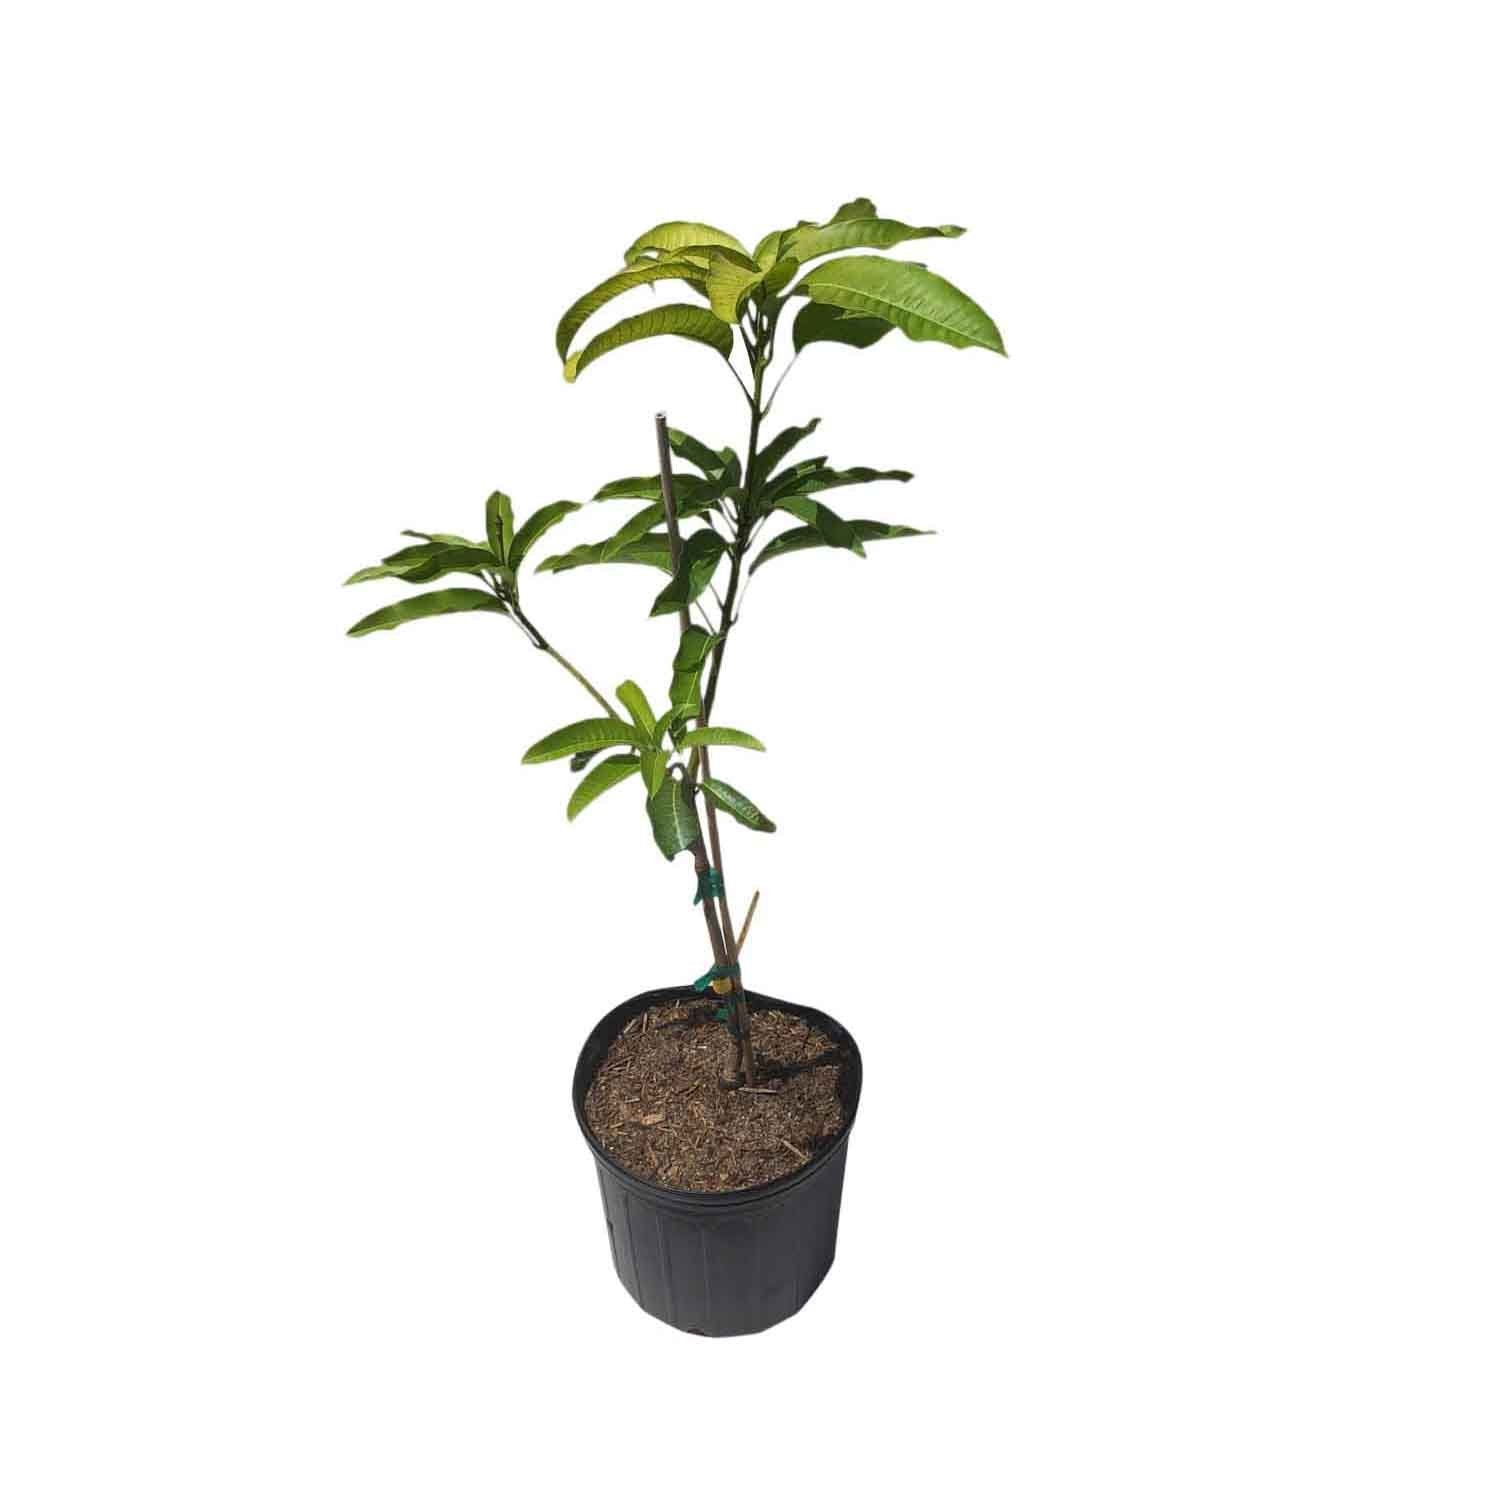 Choc Anon Mango Tree, Grafted, 3-Gal Container from Florida